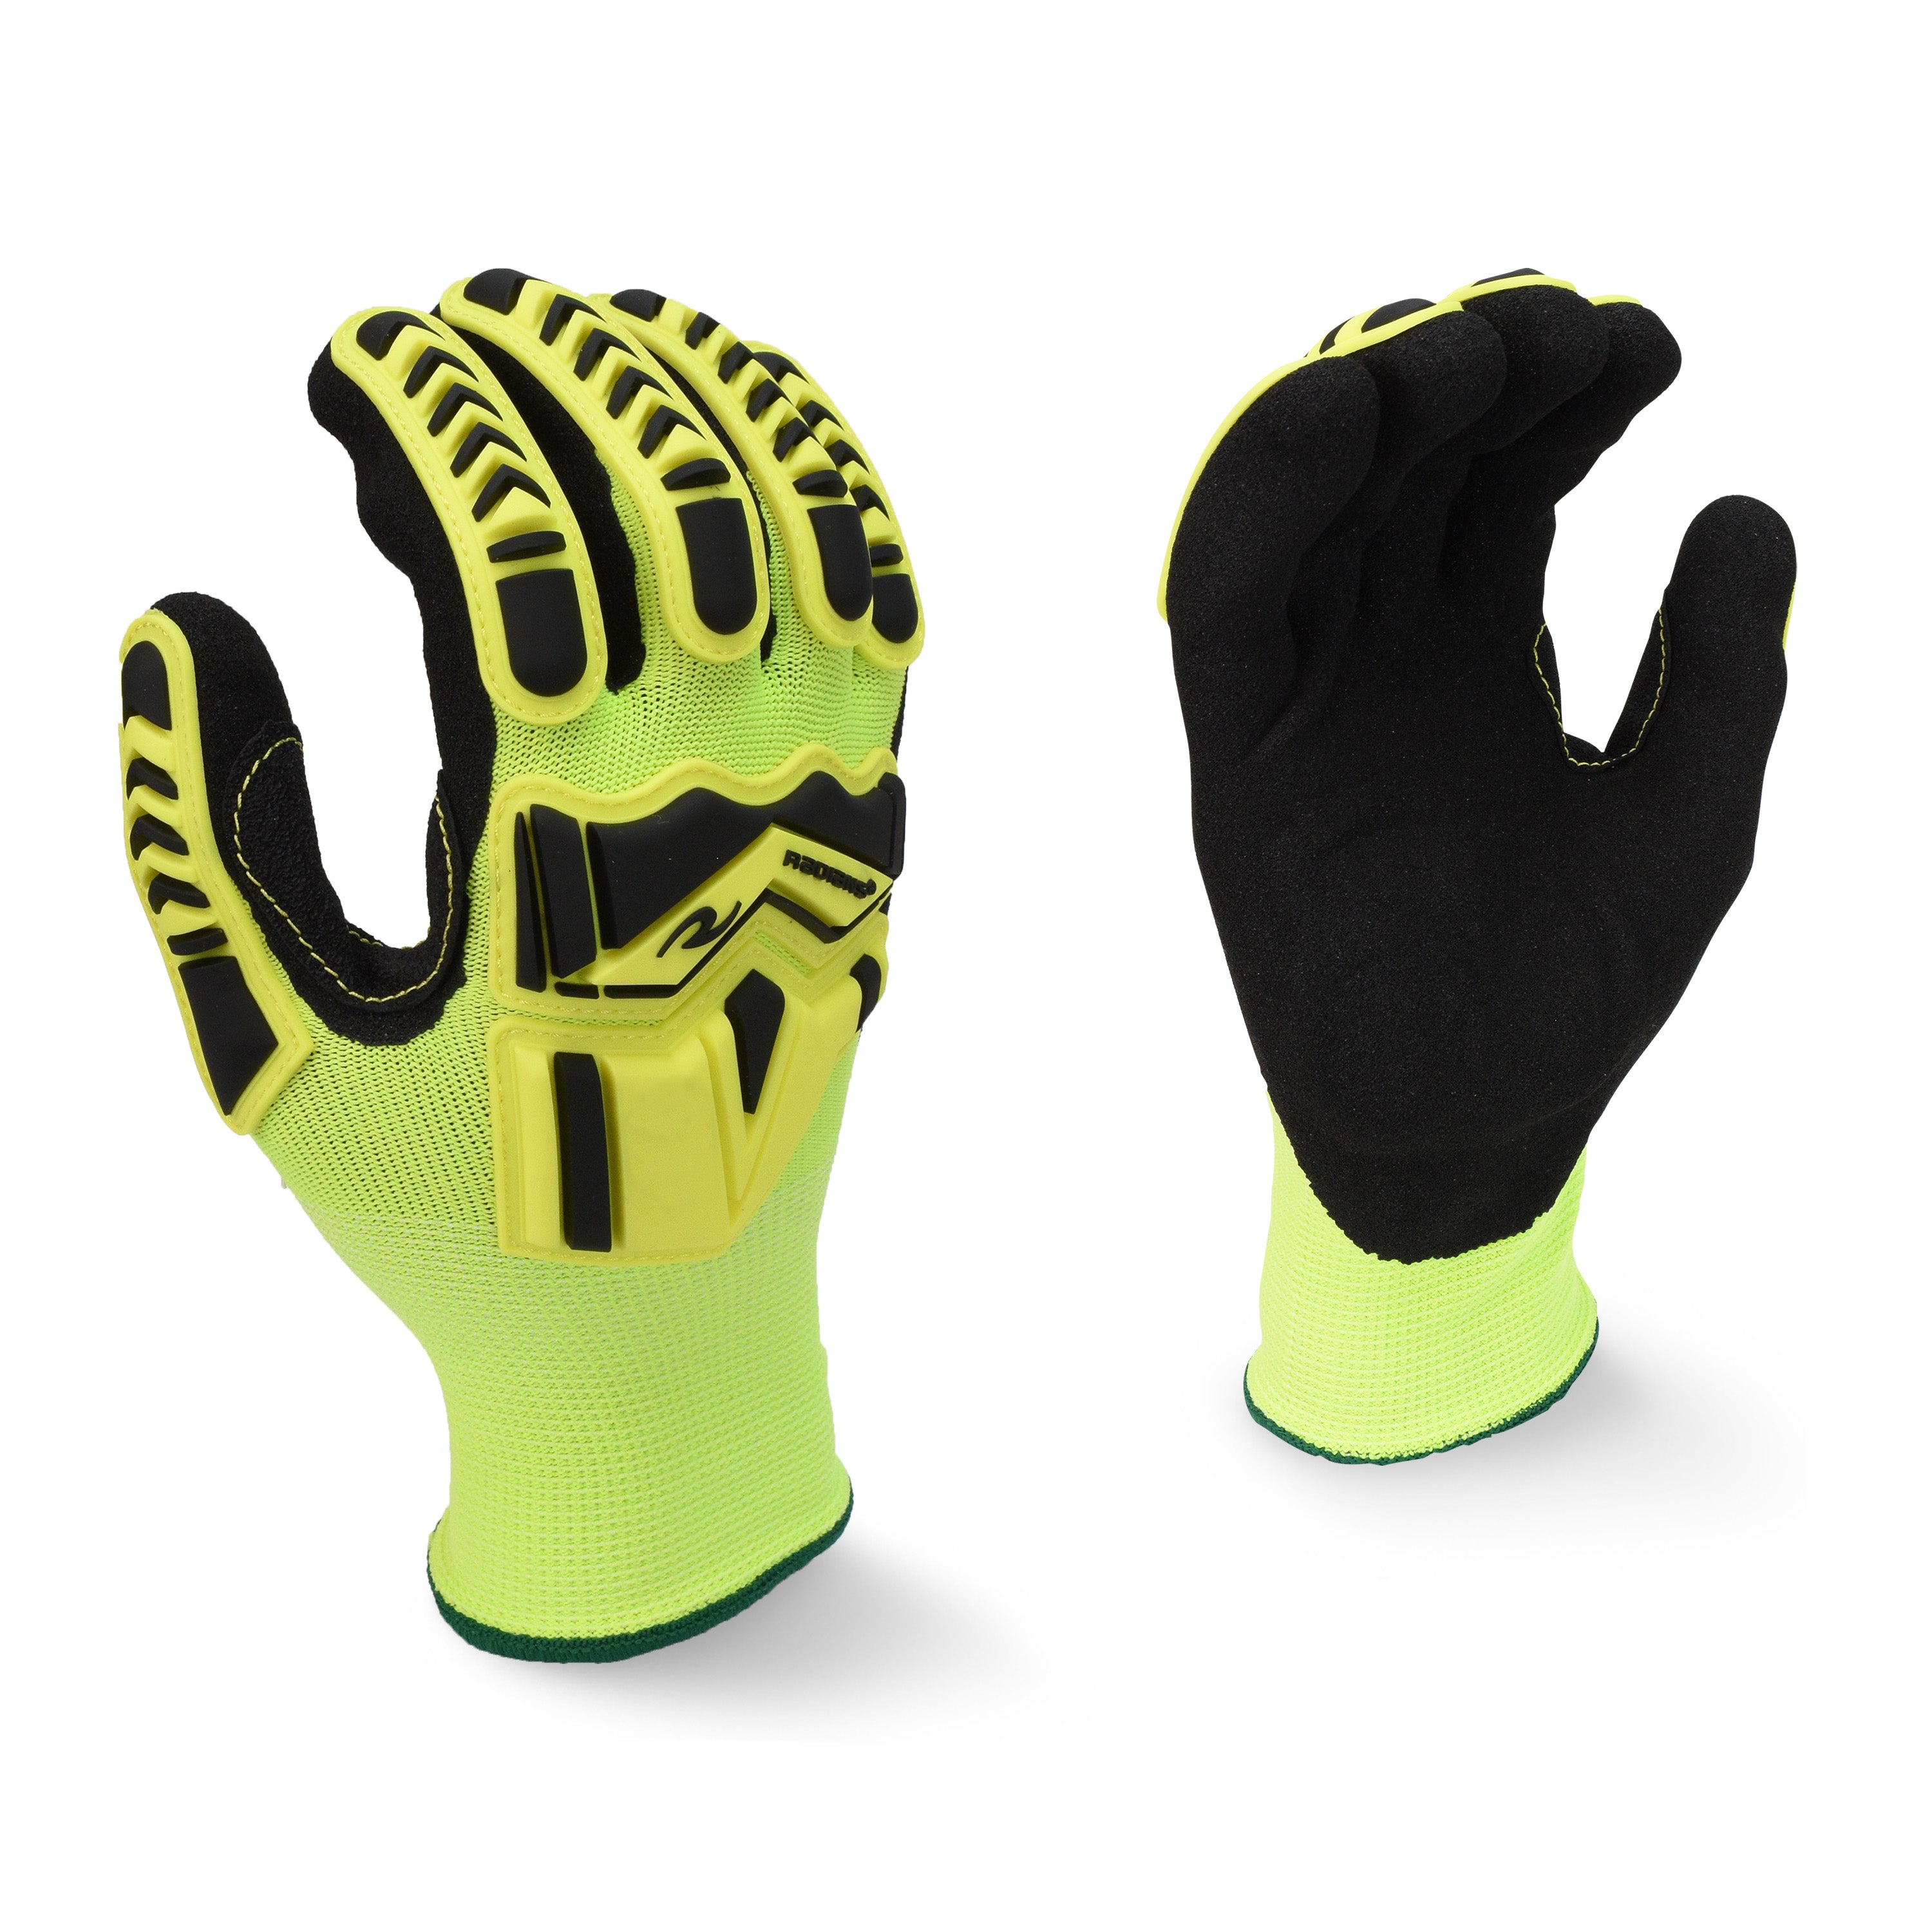 Radians RWG23 High Visibility Work Glove with TPR and Padded Palm-eSafety Supplies, Inc